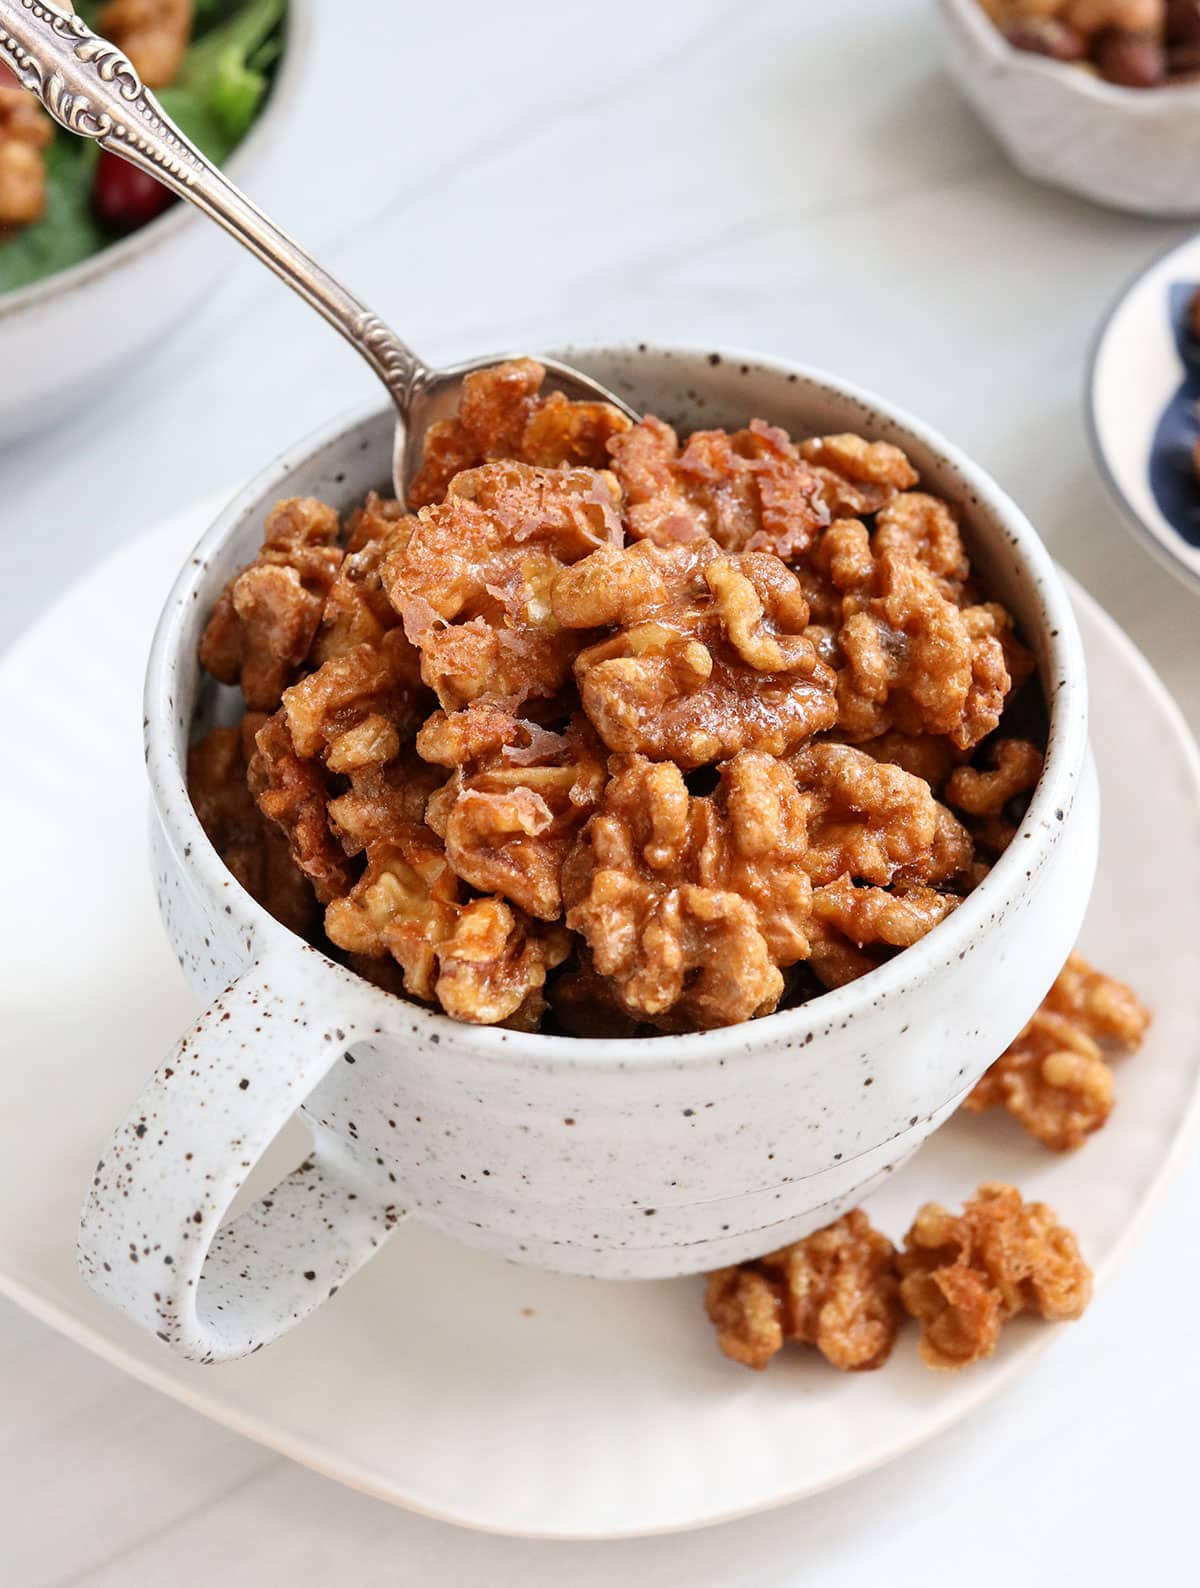 candied walnuts lifted up with a spoon in a mug.